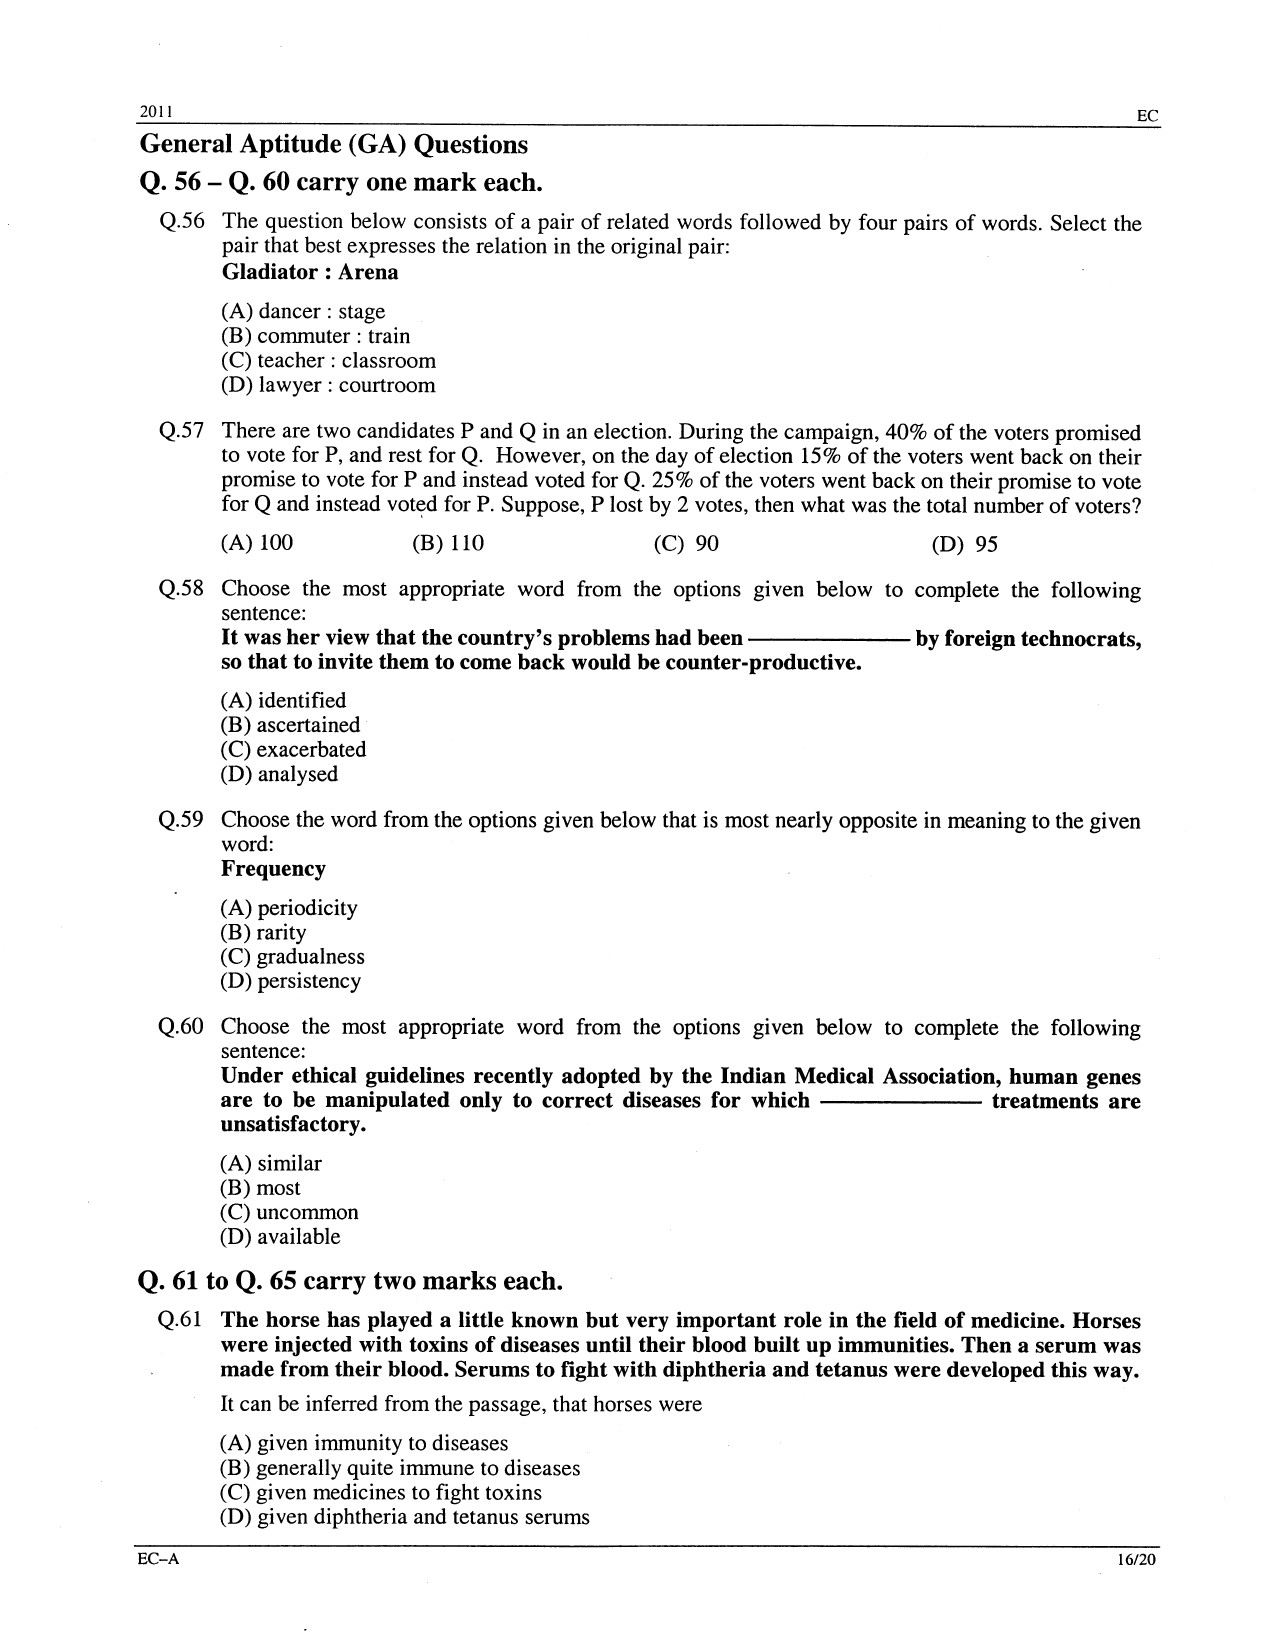 GATE Exam Question Paper 2011 Electronics and Communication Engineering 16